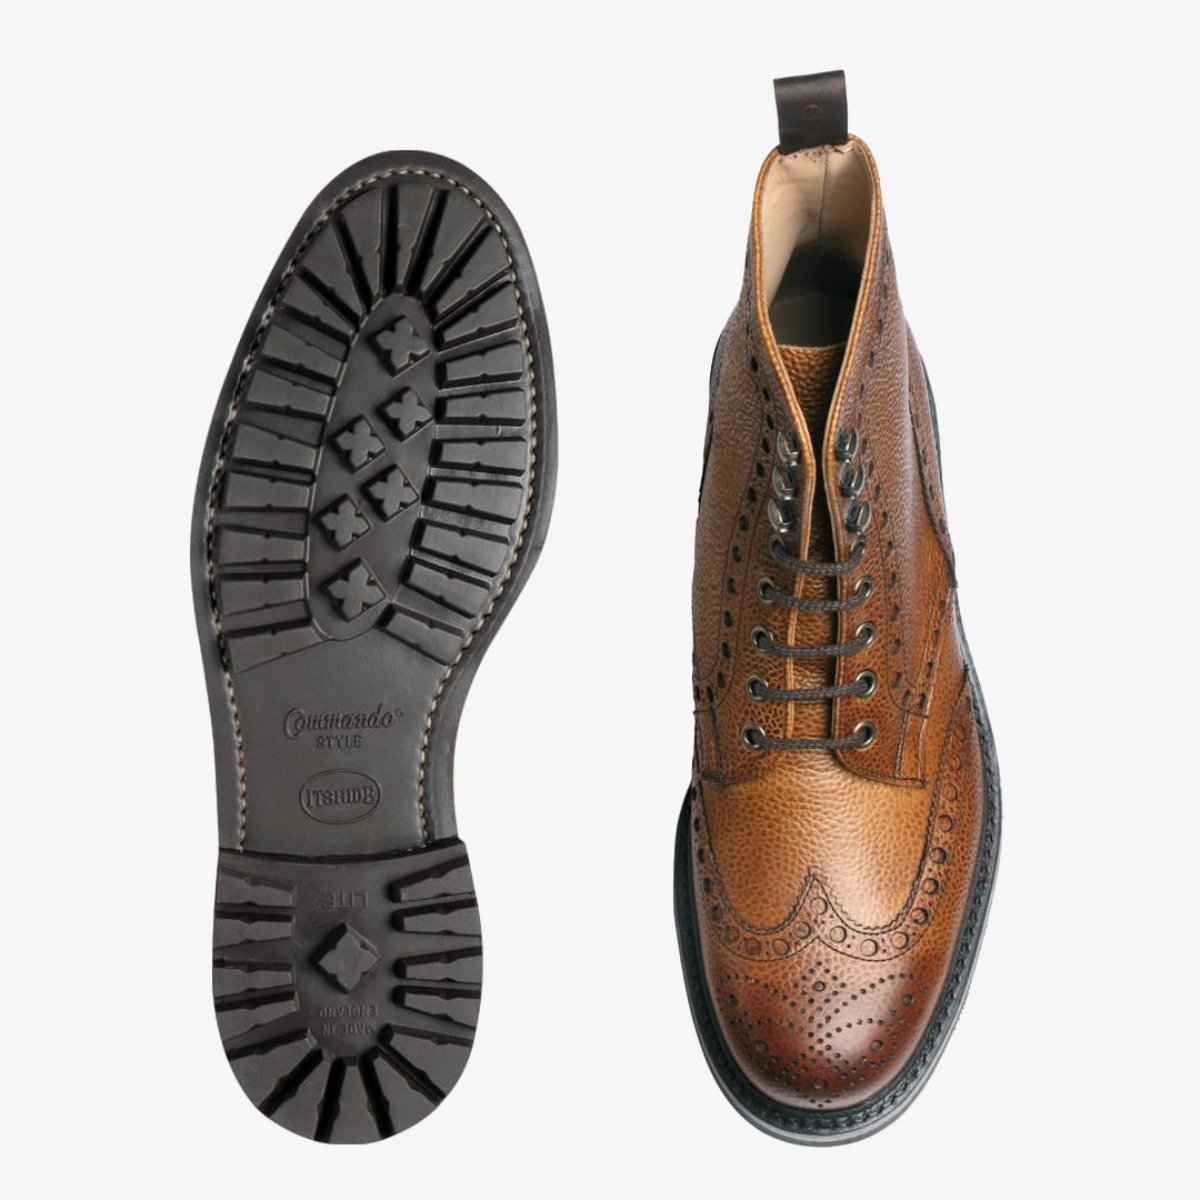 Cheaney Tweed almond brogue lace up boots